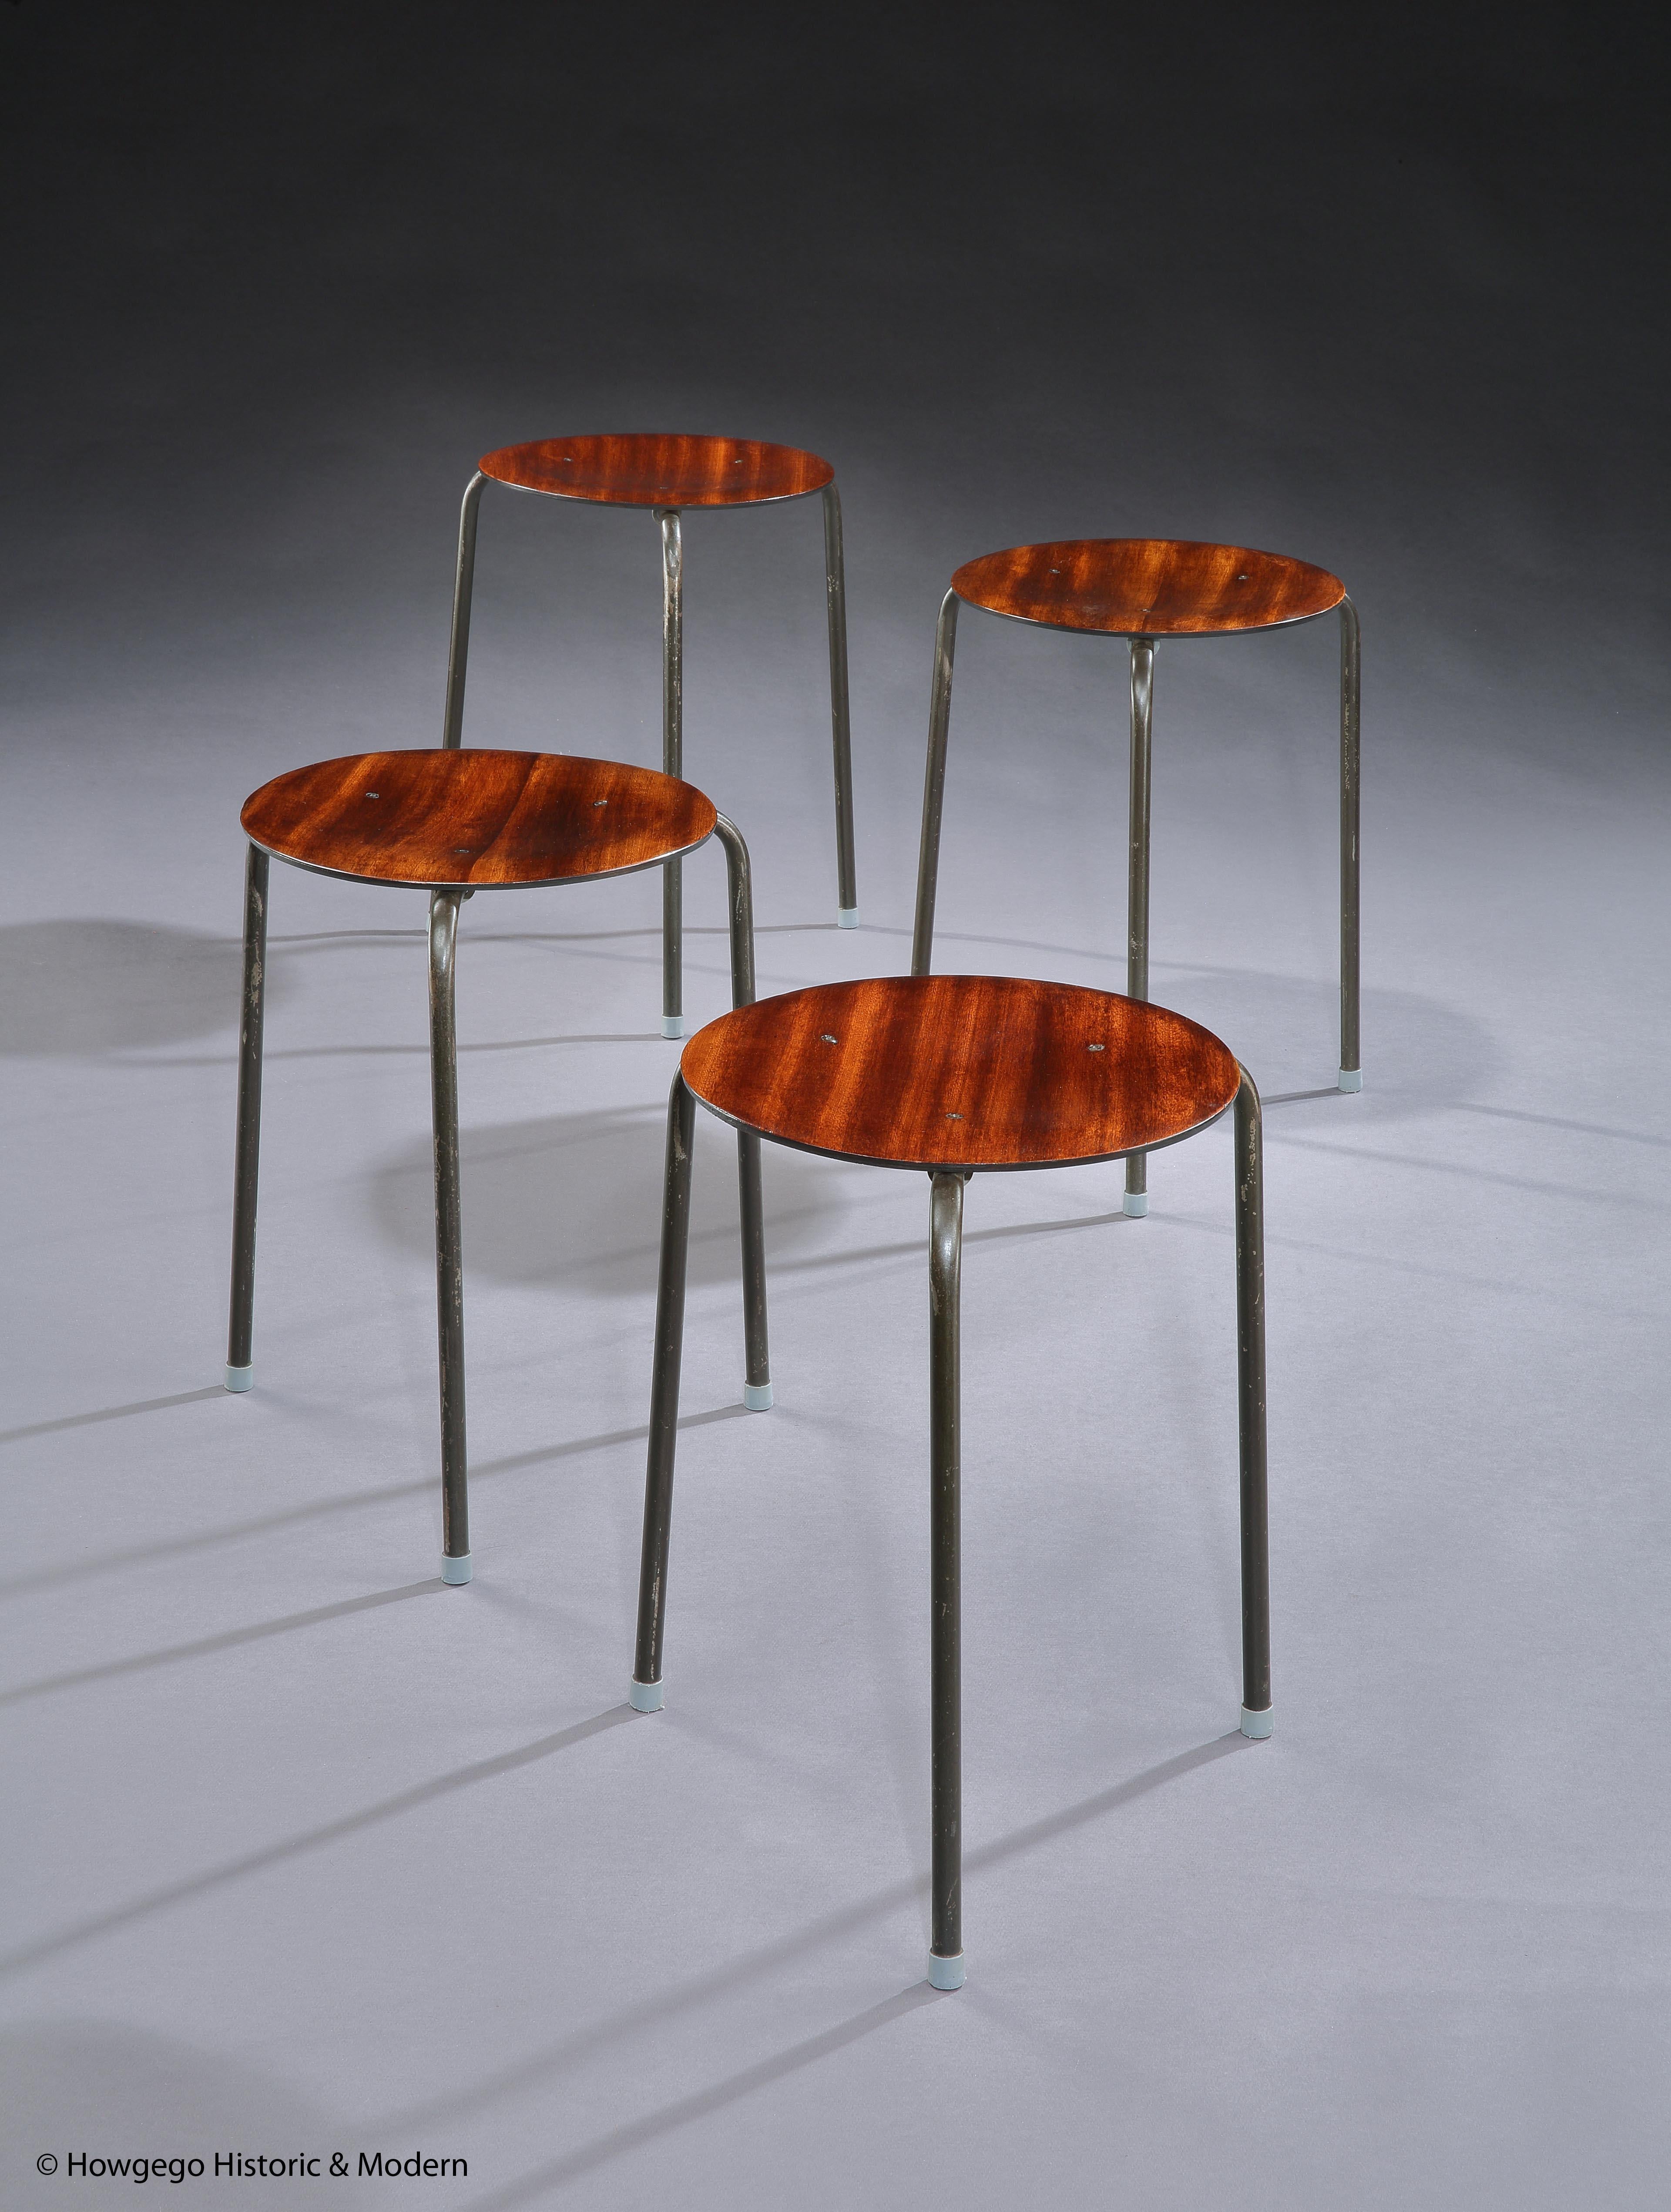 - Exceptional set of four, Mid-Century Modern Dot stools in original condition with teak seats on three chrome legs with the original grey plastic cappings on the feet.
- These dot stools inject Classic elegance into an interior and are suitable for